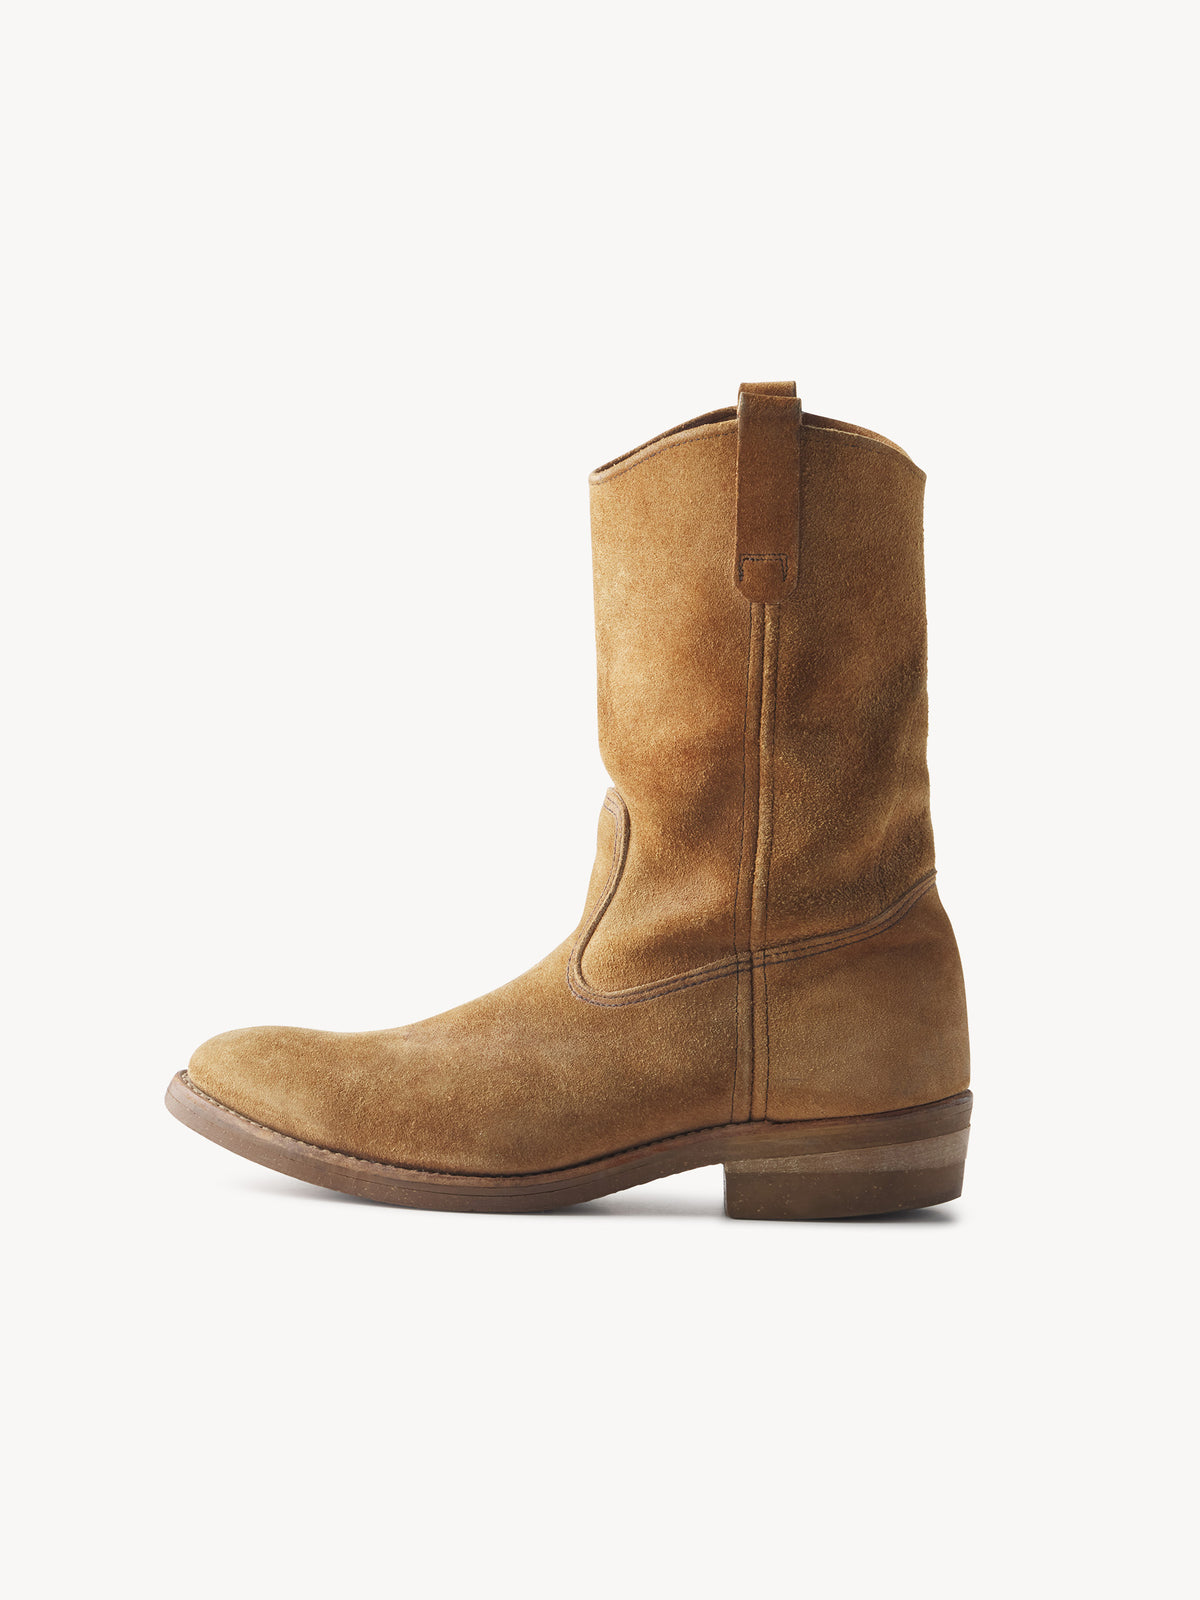 Red Wing Pecos Boots - 0054 - Product flat